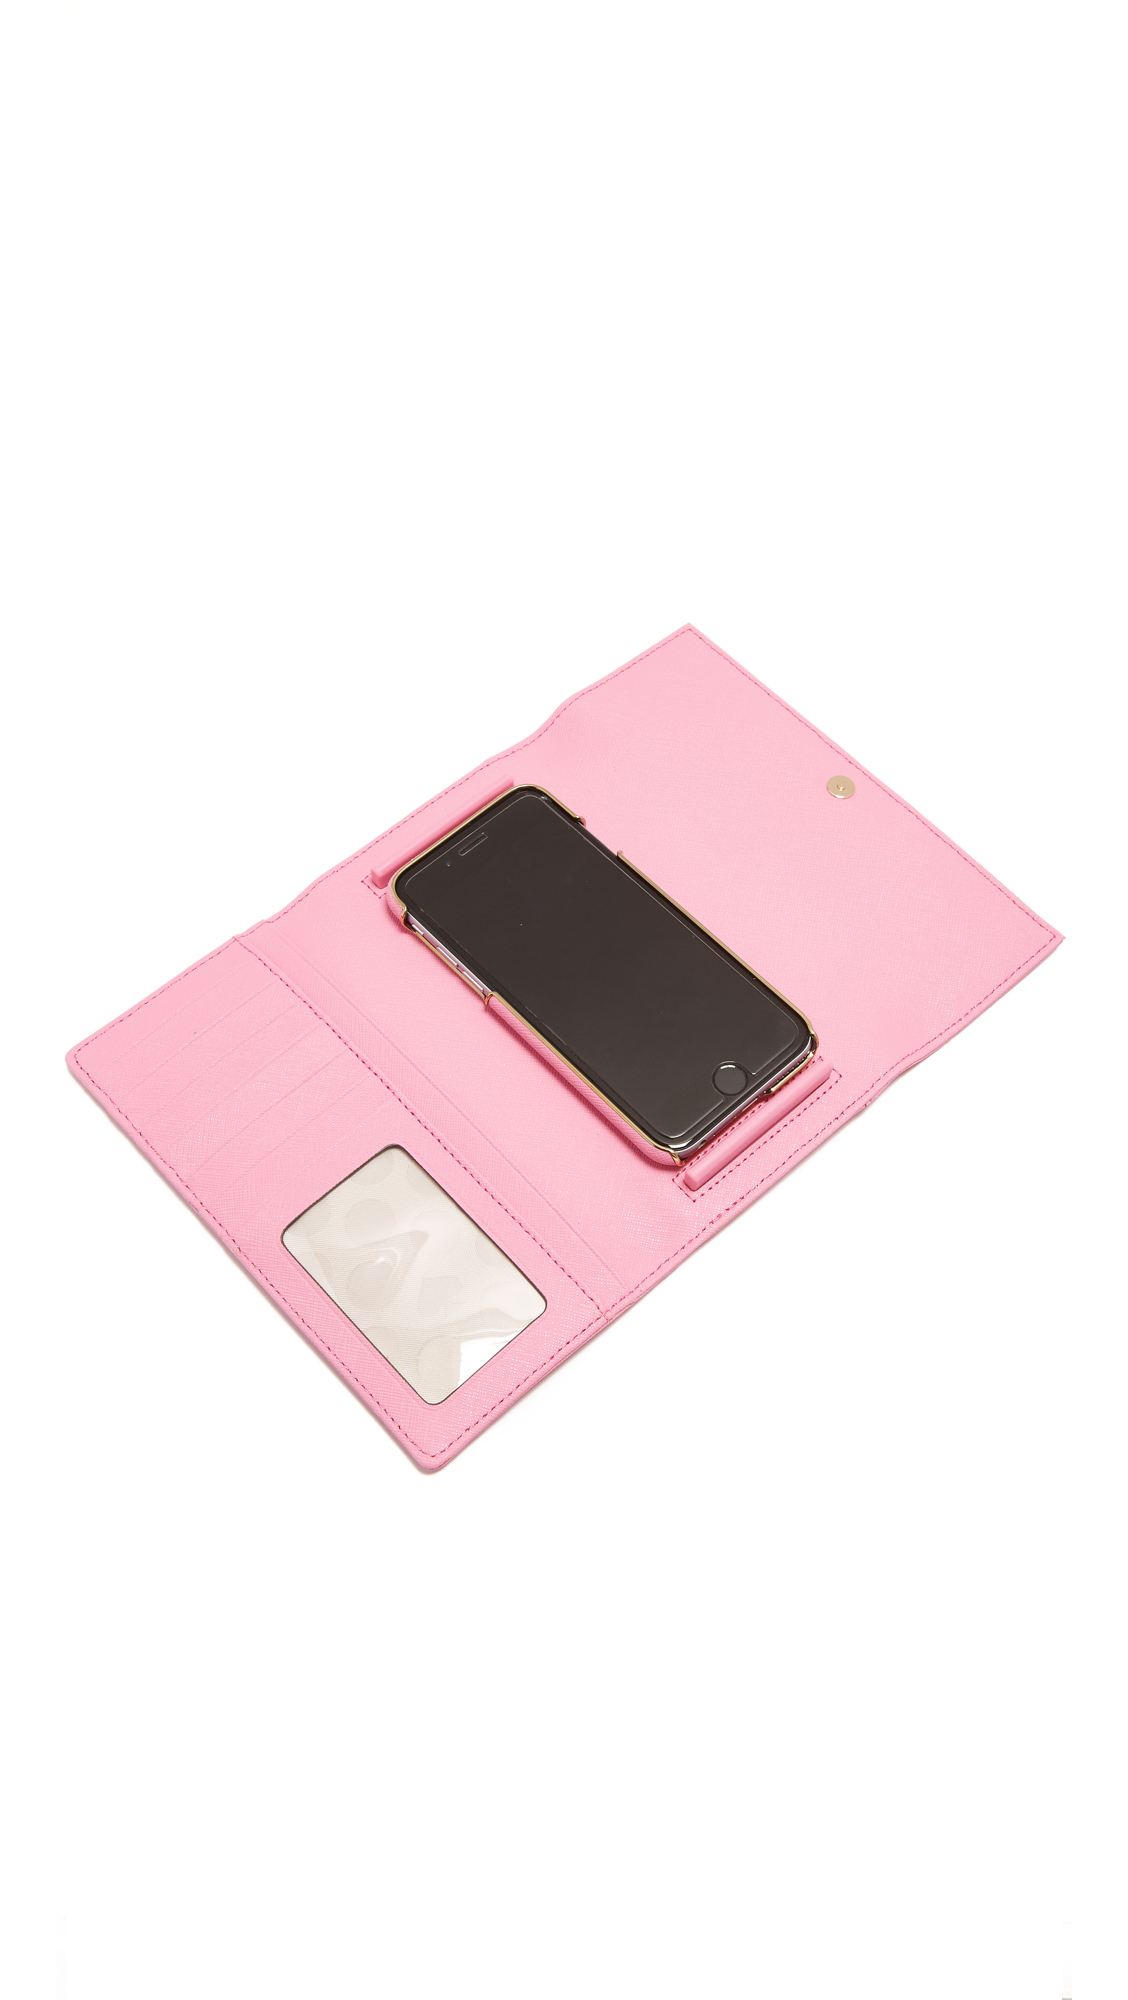 Kate spade new york Leather Iphone 6 / 6s Phone Wallet in Pink | Lyst